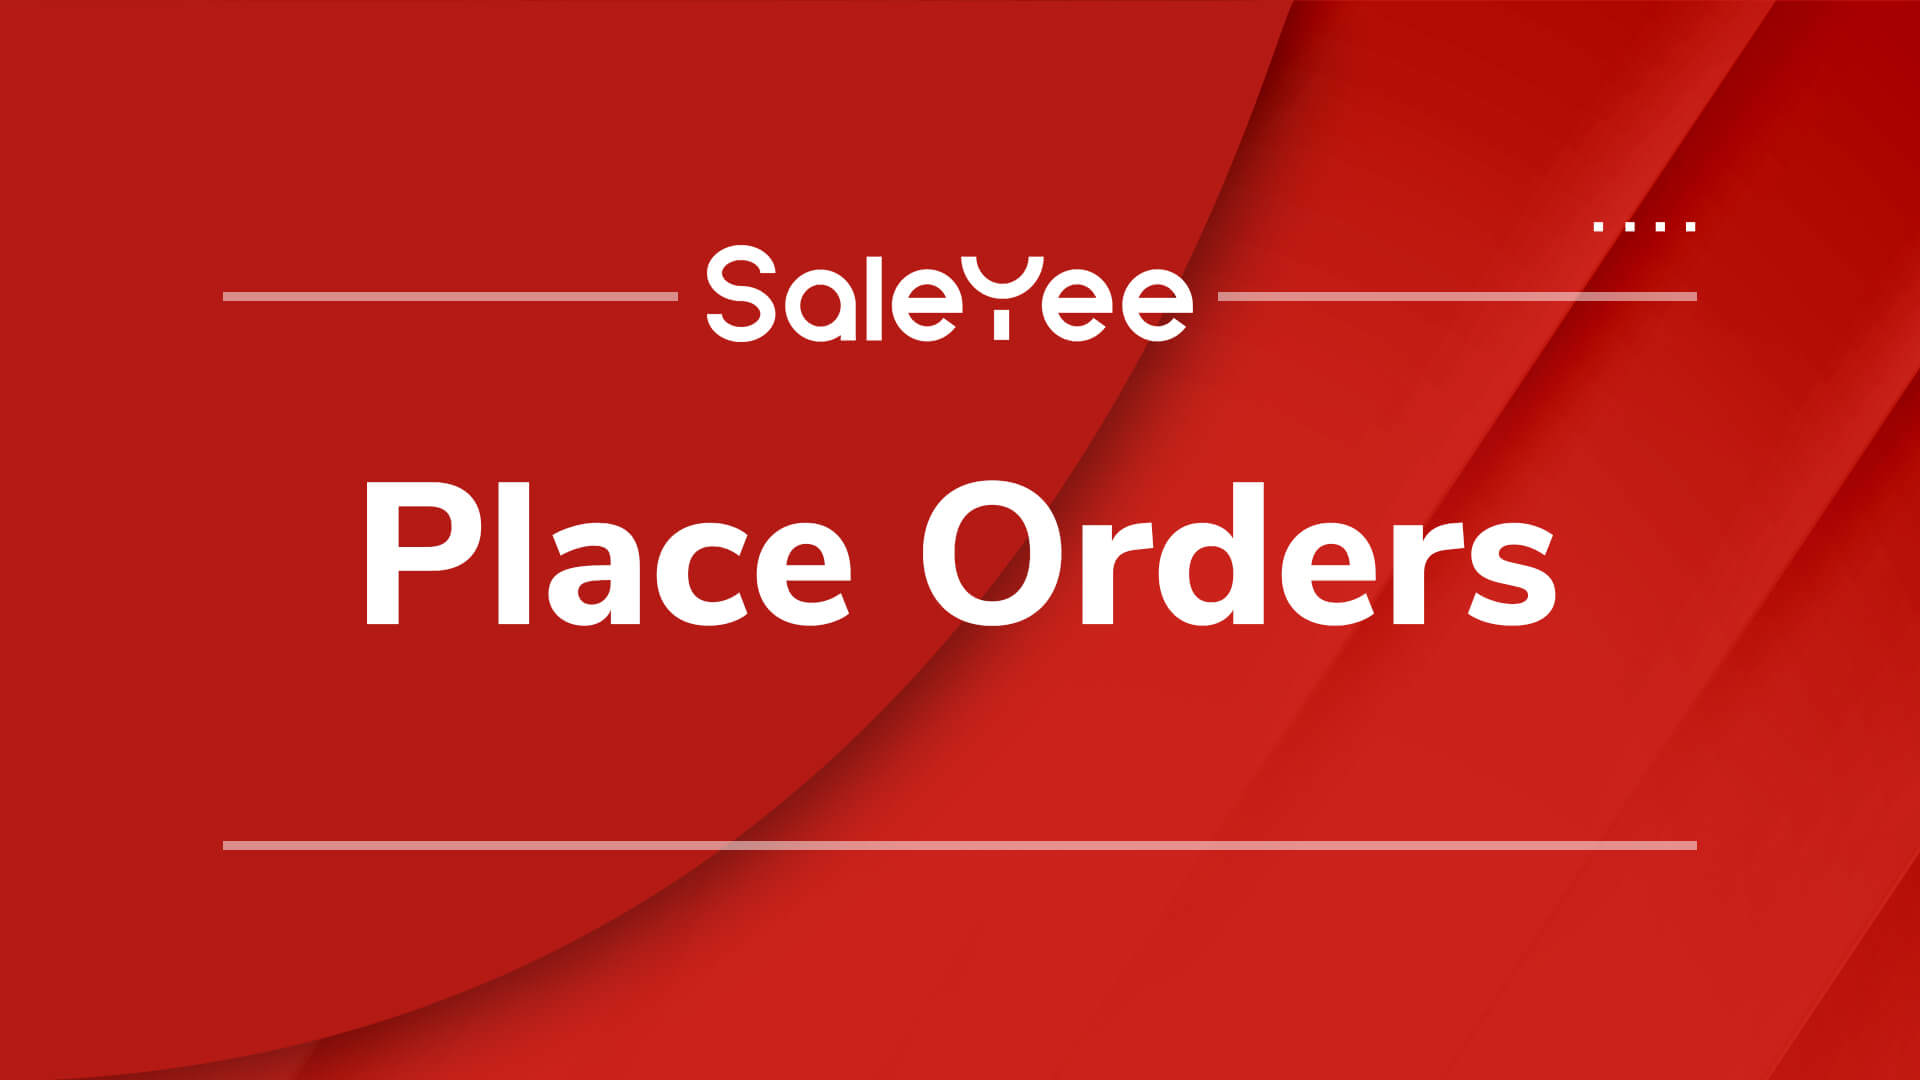 3. Four Ways to Place Orders